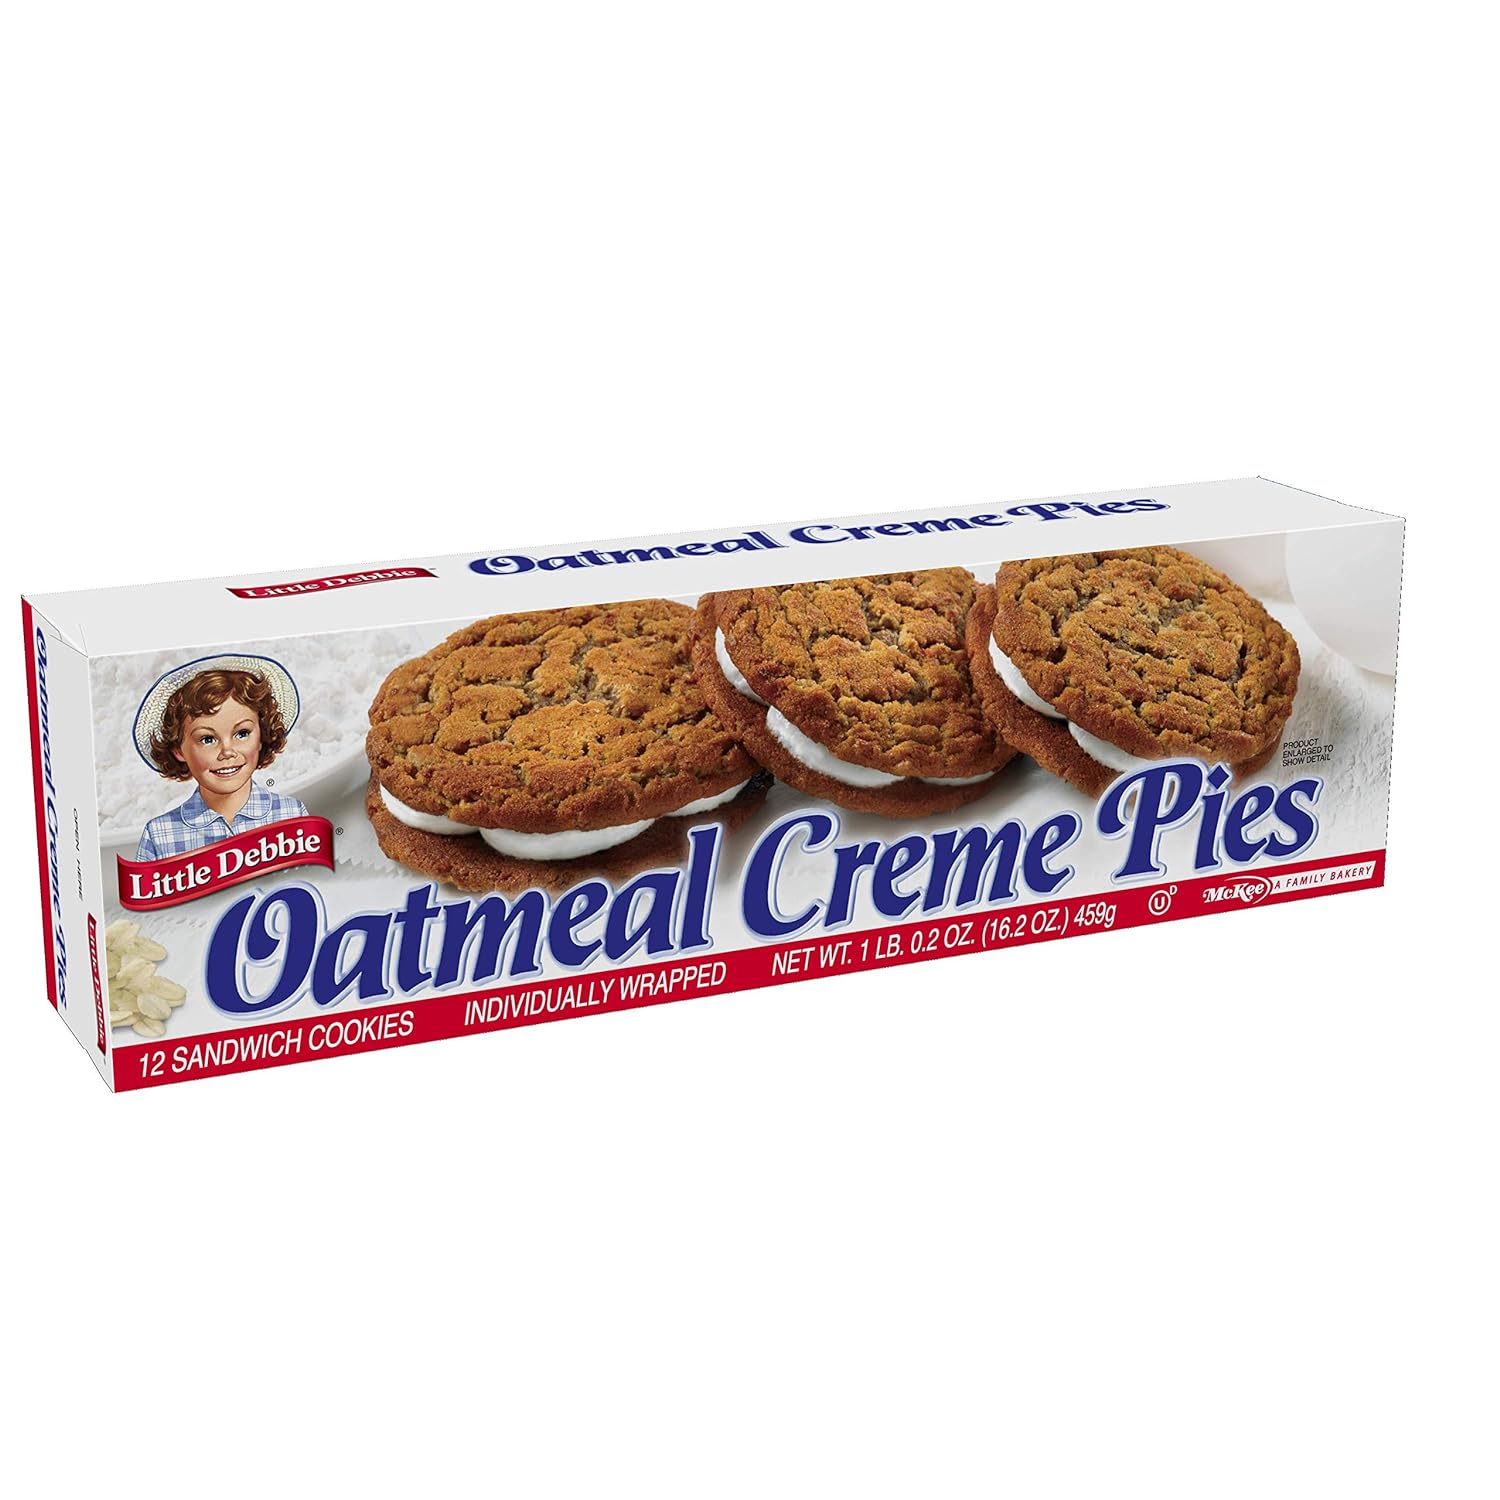 Little Debbie Oatmeal Creme Pies, 12 Individually Wrapped creme pies, 16.2 Ounces, Pack of One (1)